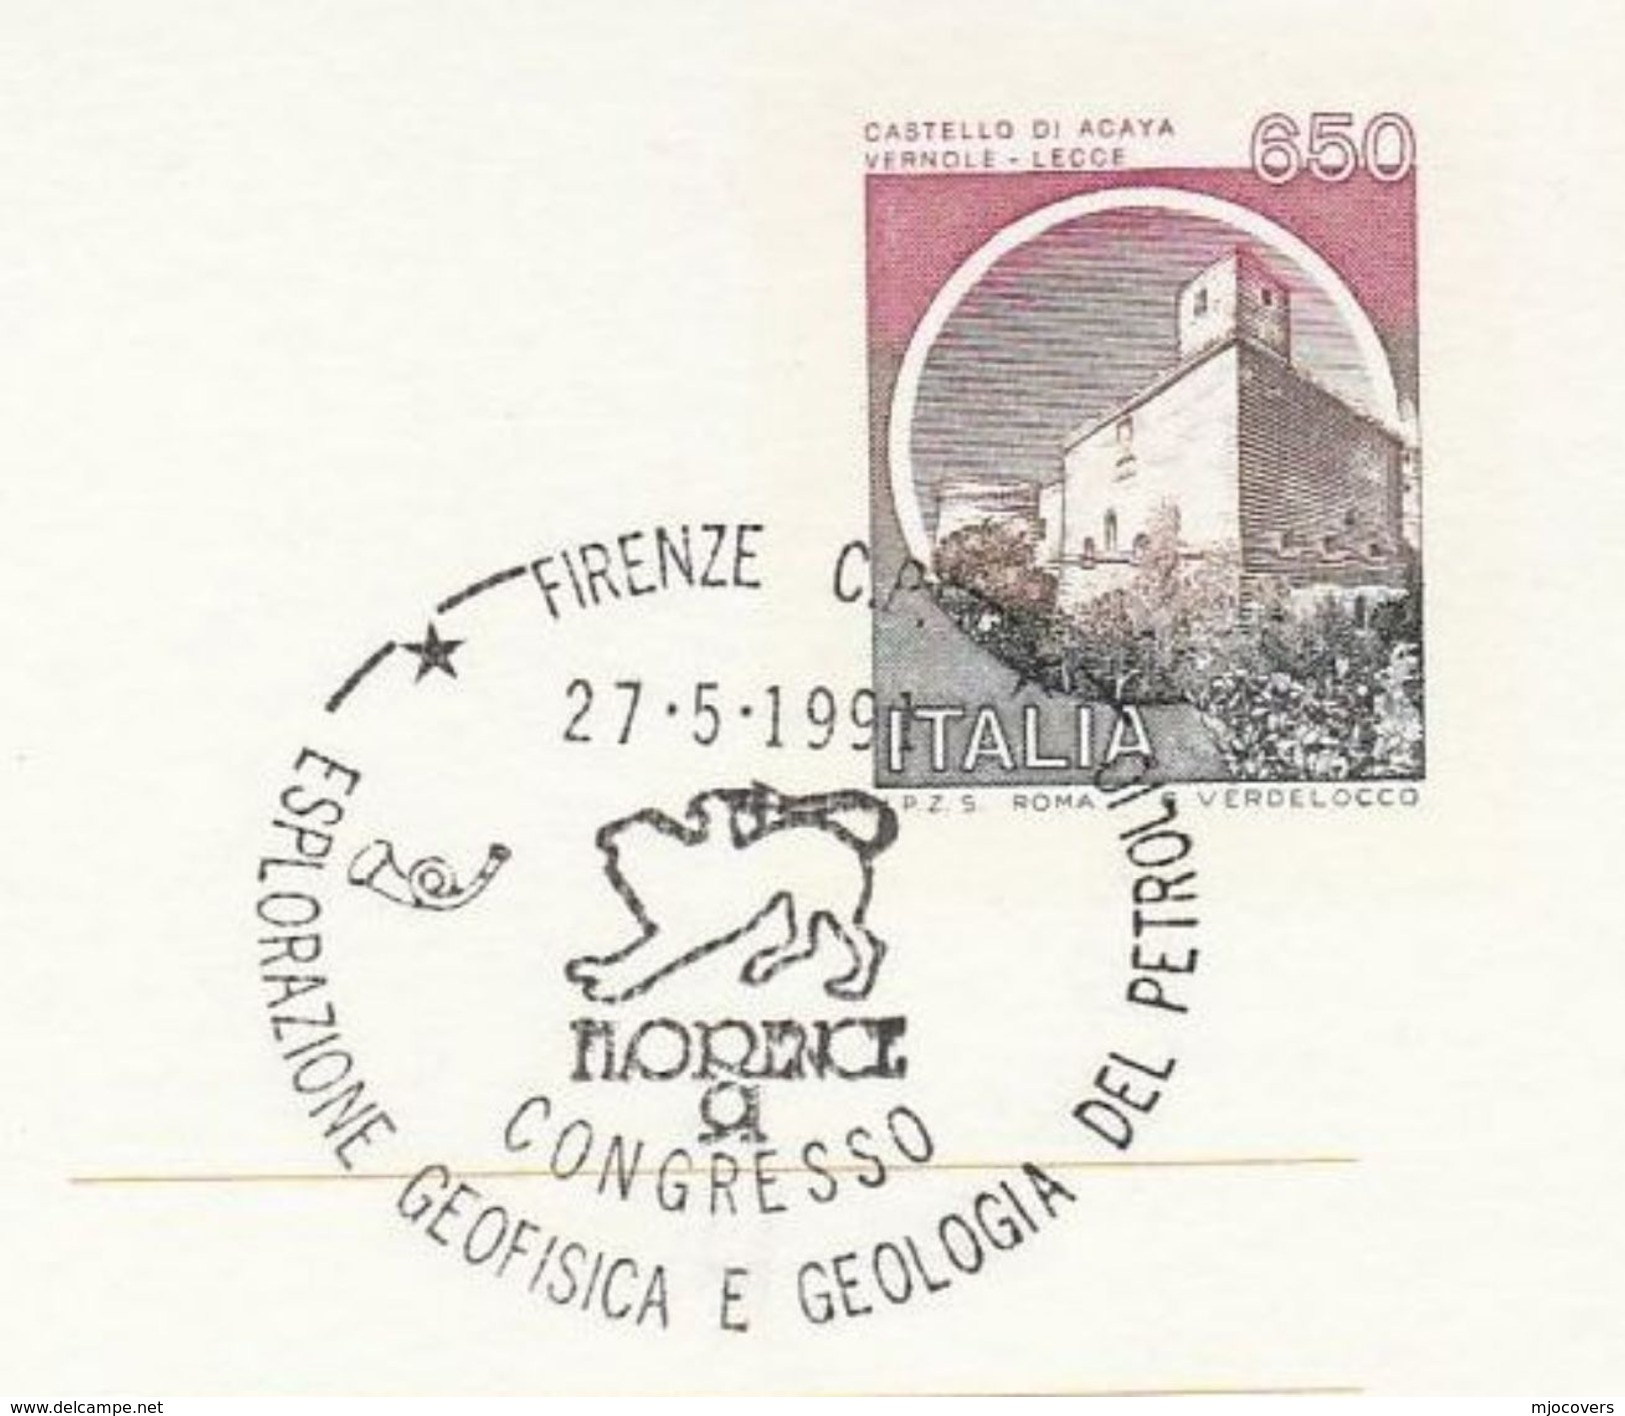 1991 Firenze OIL EXPLORATION GEOPHYSICS CONGRESS Event COVER Italy Geology Stationery Stamp Petroleum Minerals Energy - Erdöl